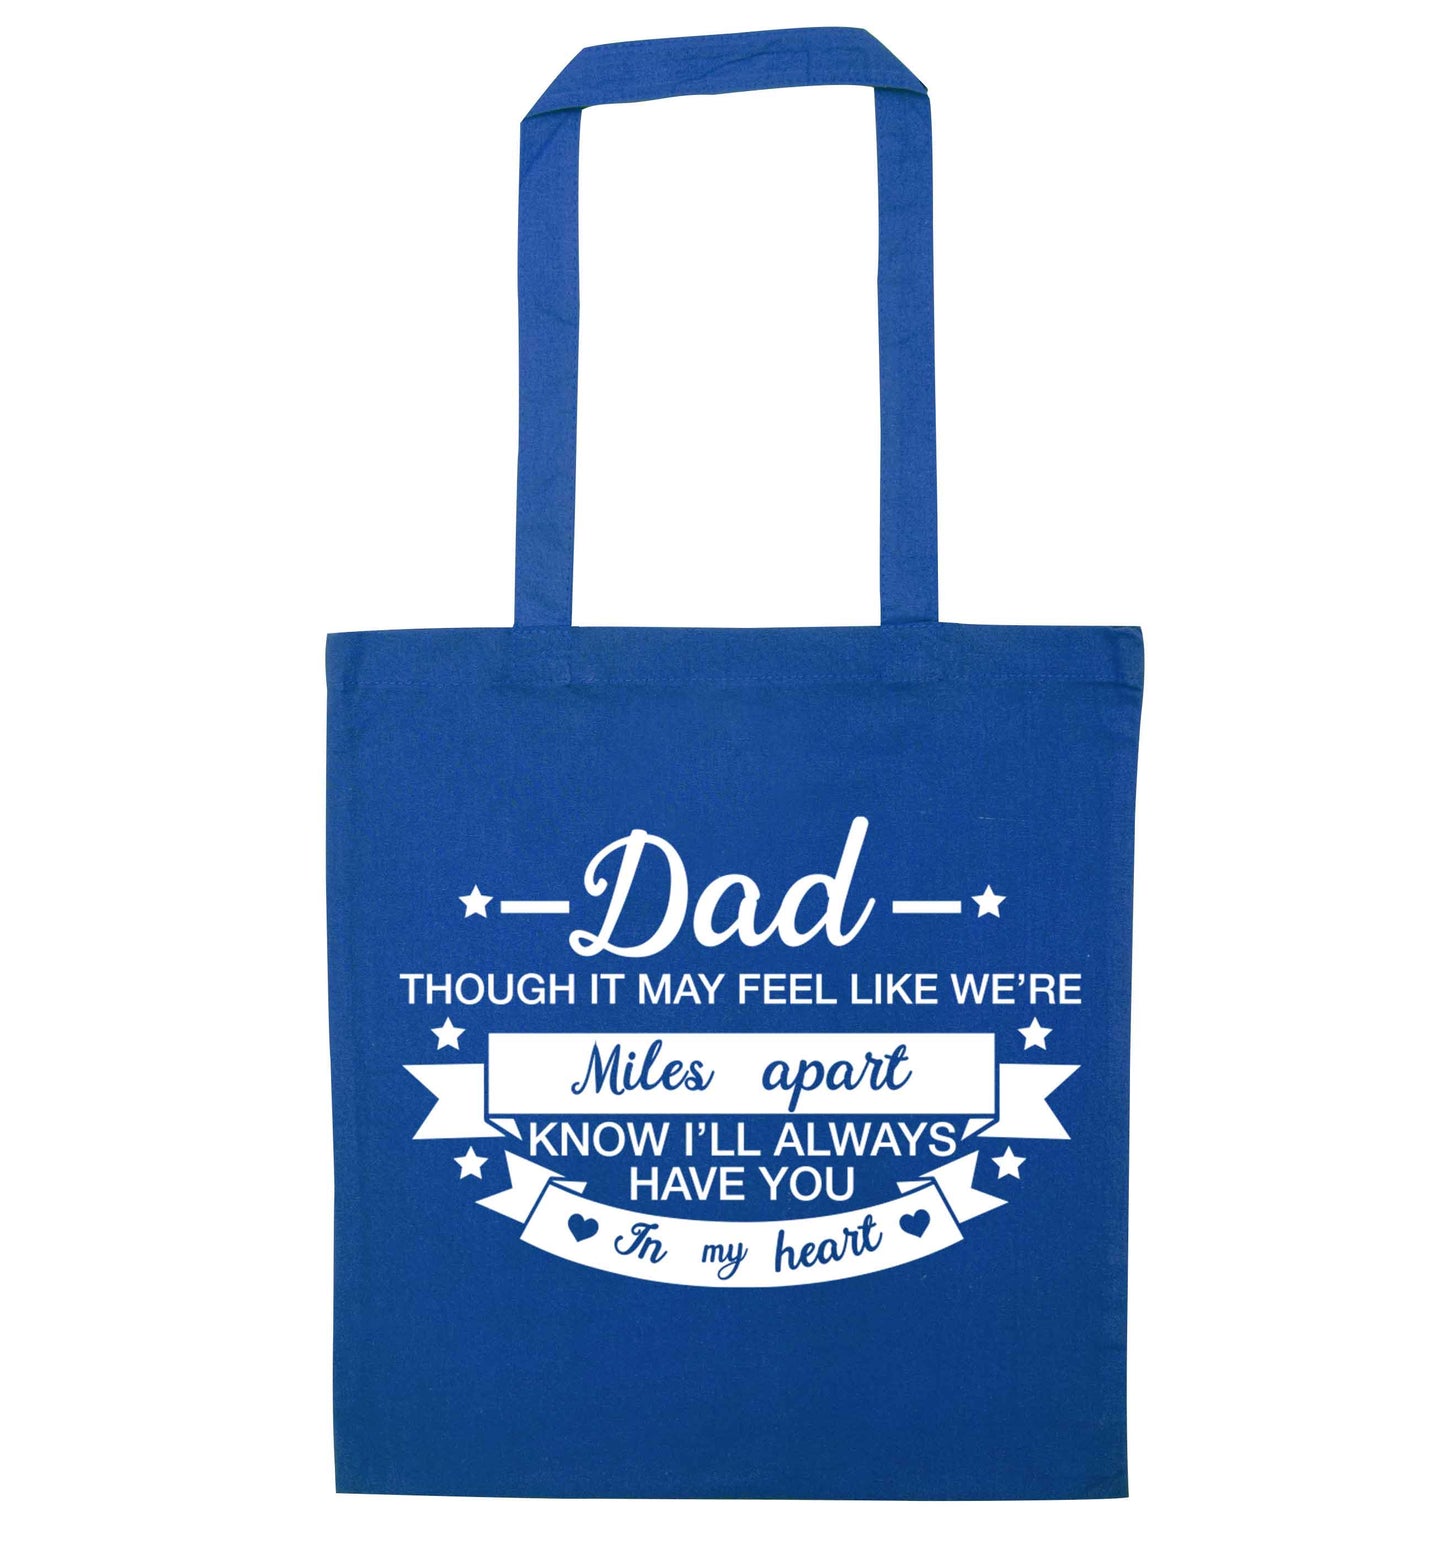 Dad though it may feel like we're miles apart know I'll always have you in my heart blue tote bag